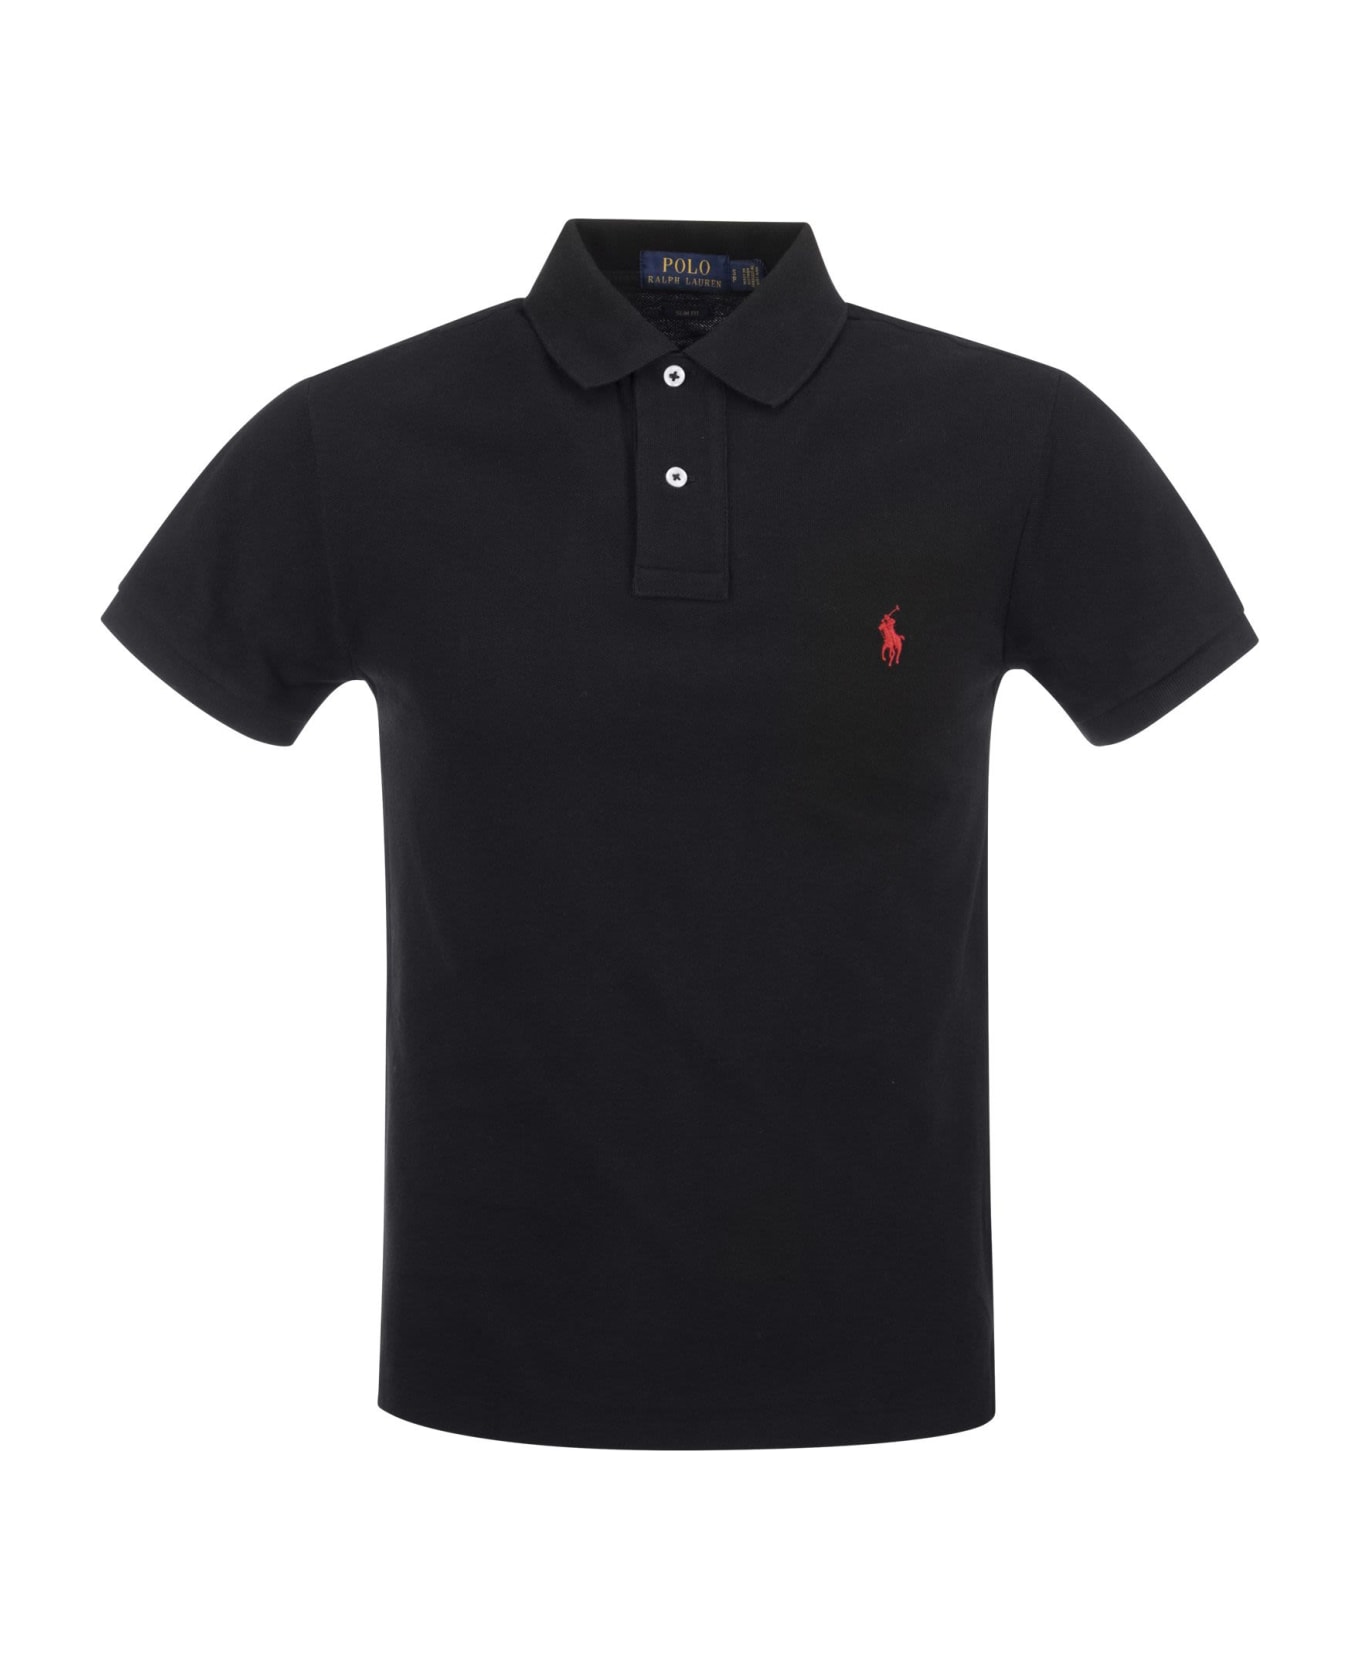 Polo Ralph Lauren Black And Red Slim-fit Pique Polo Shirt - 006 ポロシャツ